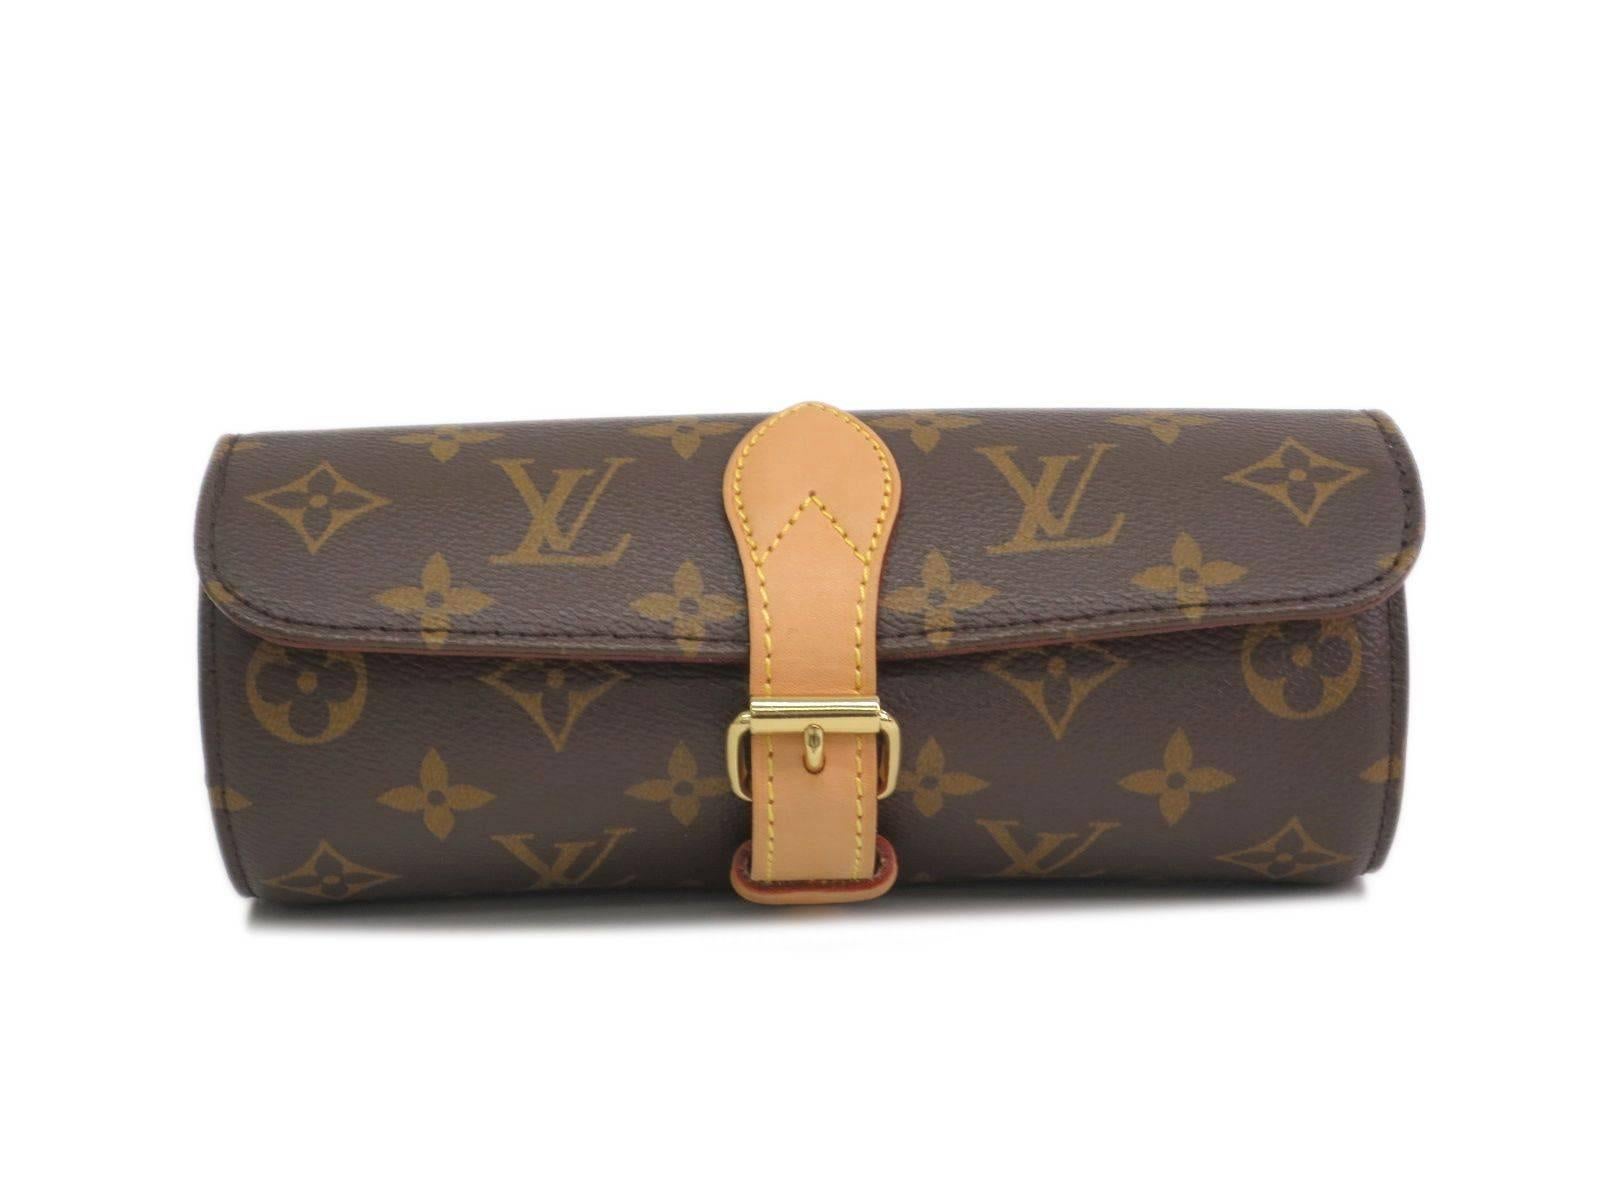 CURATOR'S NOTES

Store your three favorite timepieces in this gorgeous Louis Vuitton watch storage case.  Ideal for traveling!

Monogram 
Gold hardware
Belt closure
Made in France
Date code SN4049
Measures 8.3